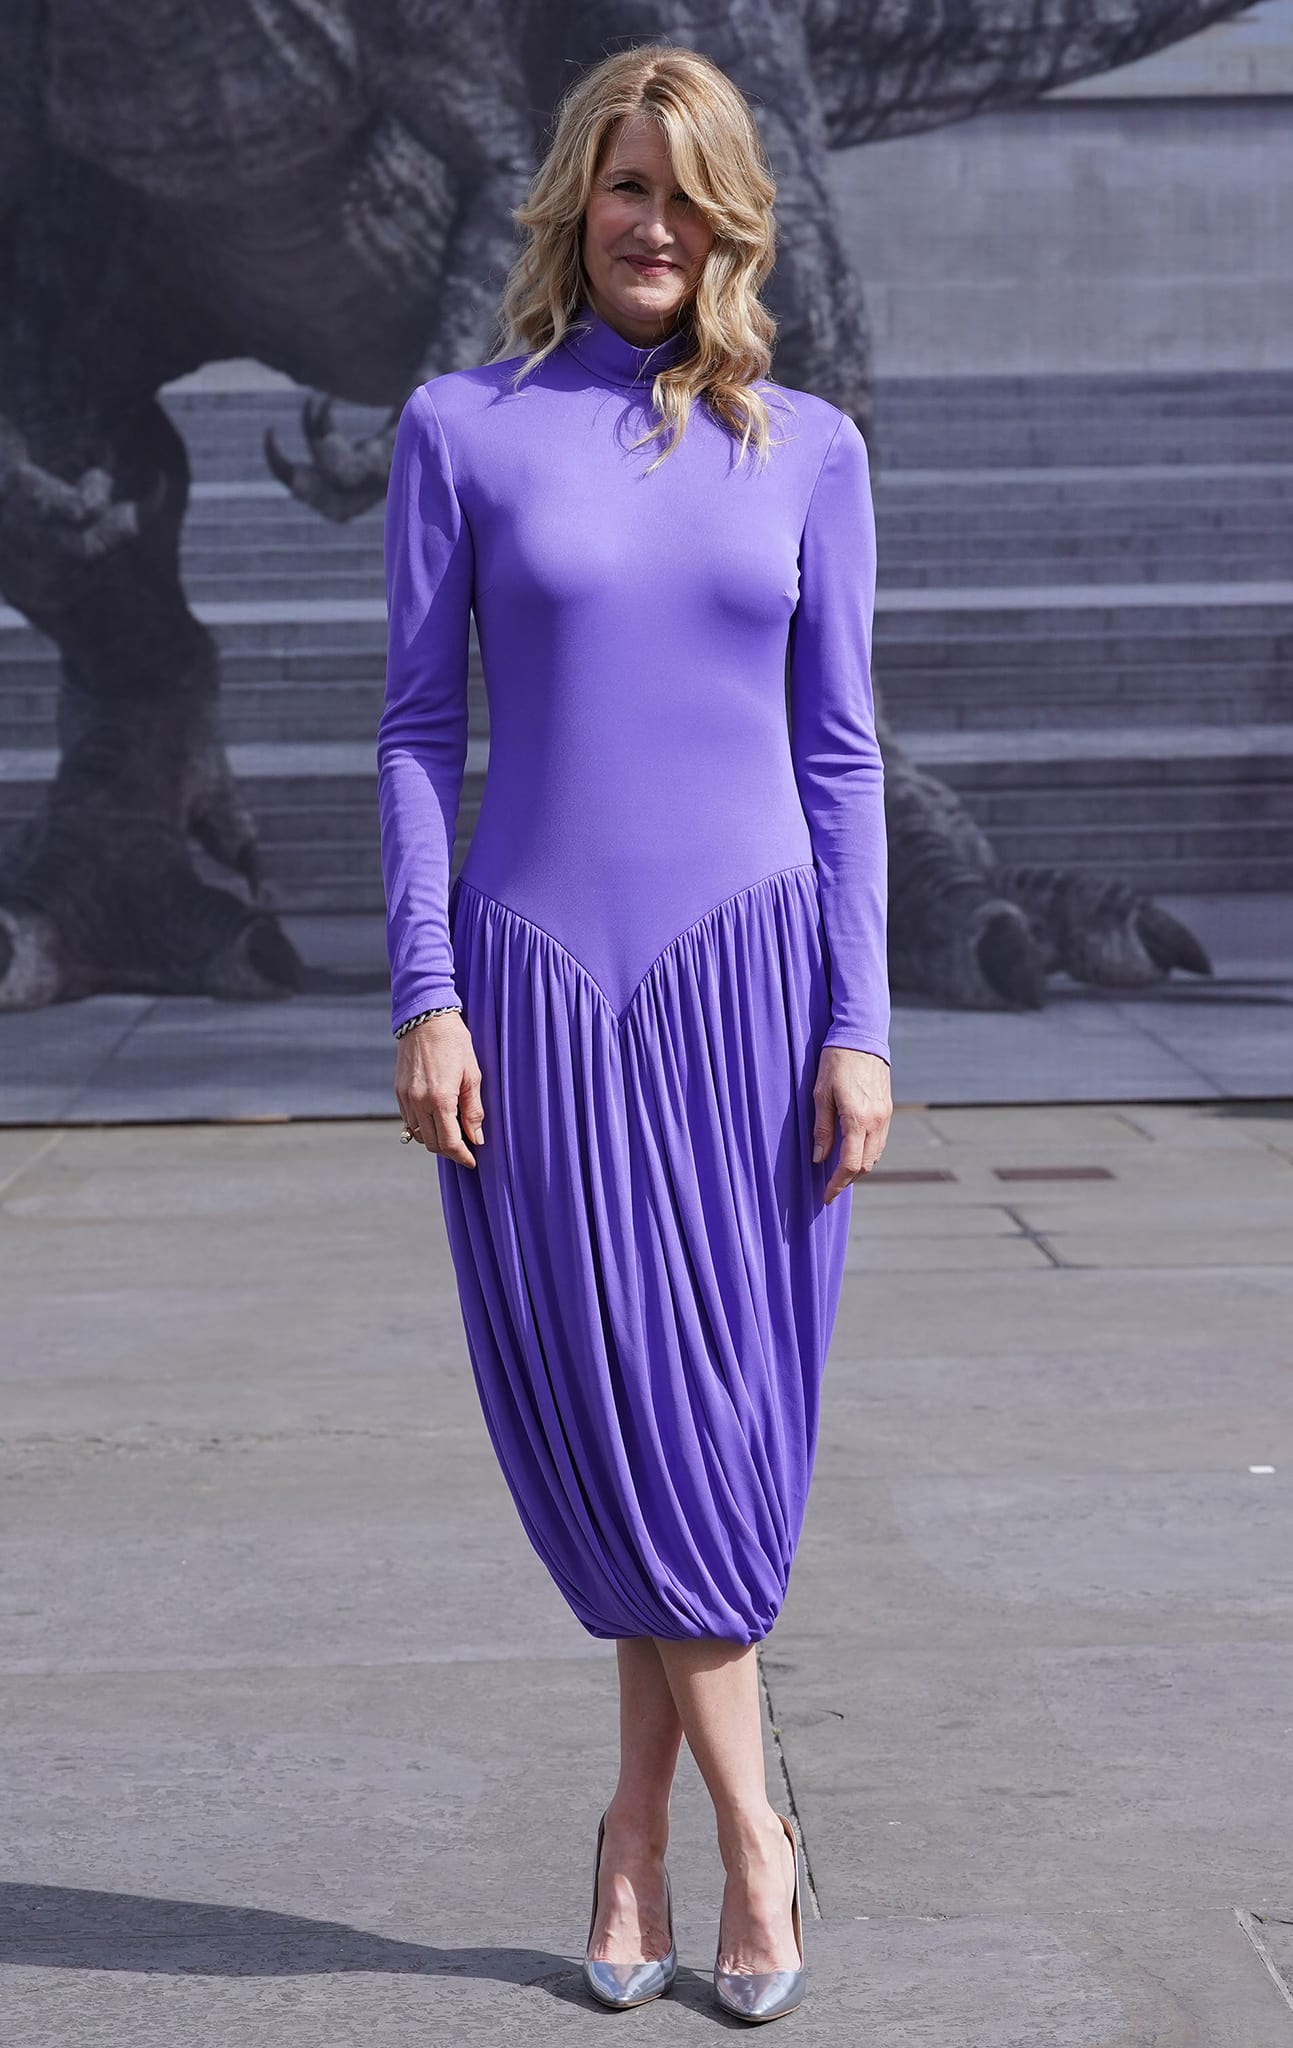 Laura Dern stands out in a purple Stella McCartney slinky, draped dress at the London photocall on May 27, 2022